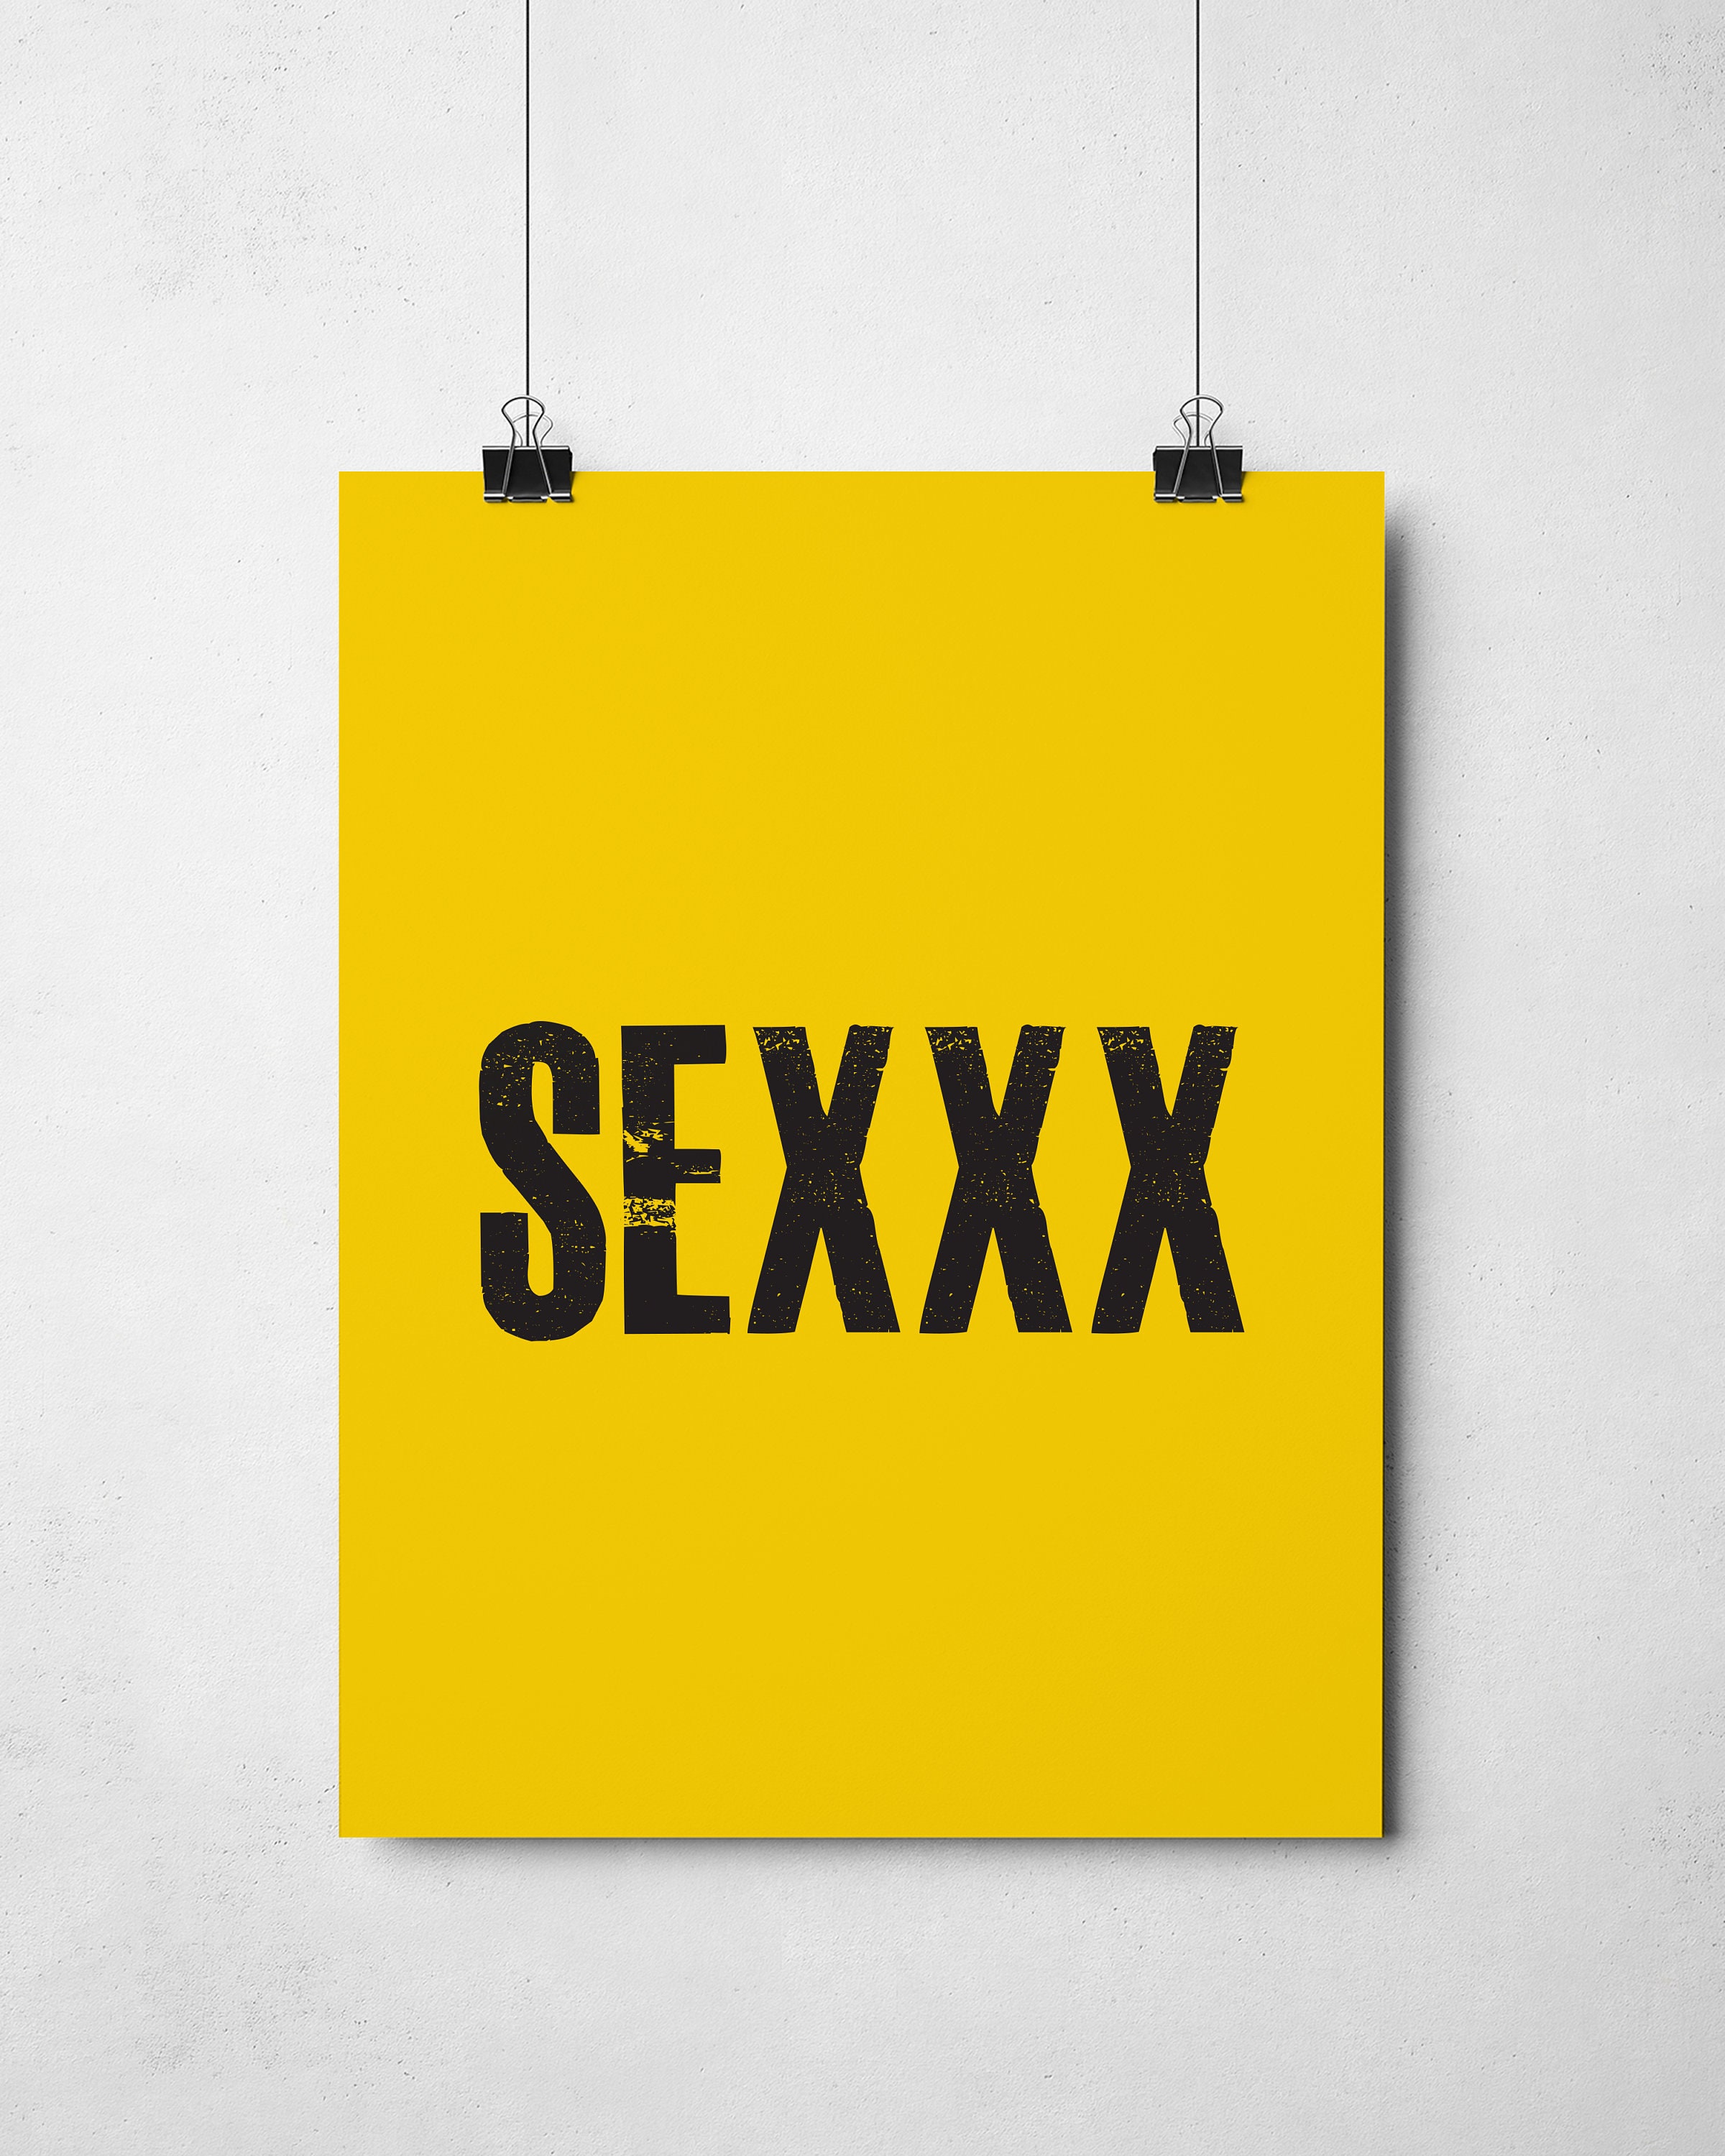 Xxxxxxxx Video Girl And Bay - SEX Wall Art Print Gallery Wall Typography X Rated Triple - Etsy Hong Kong